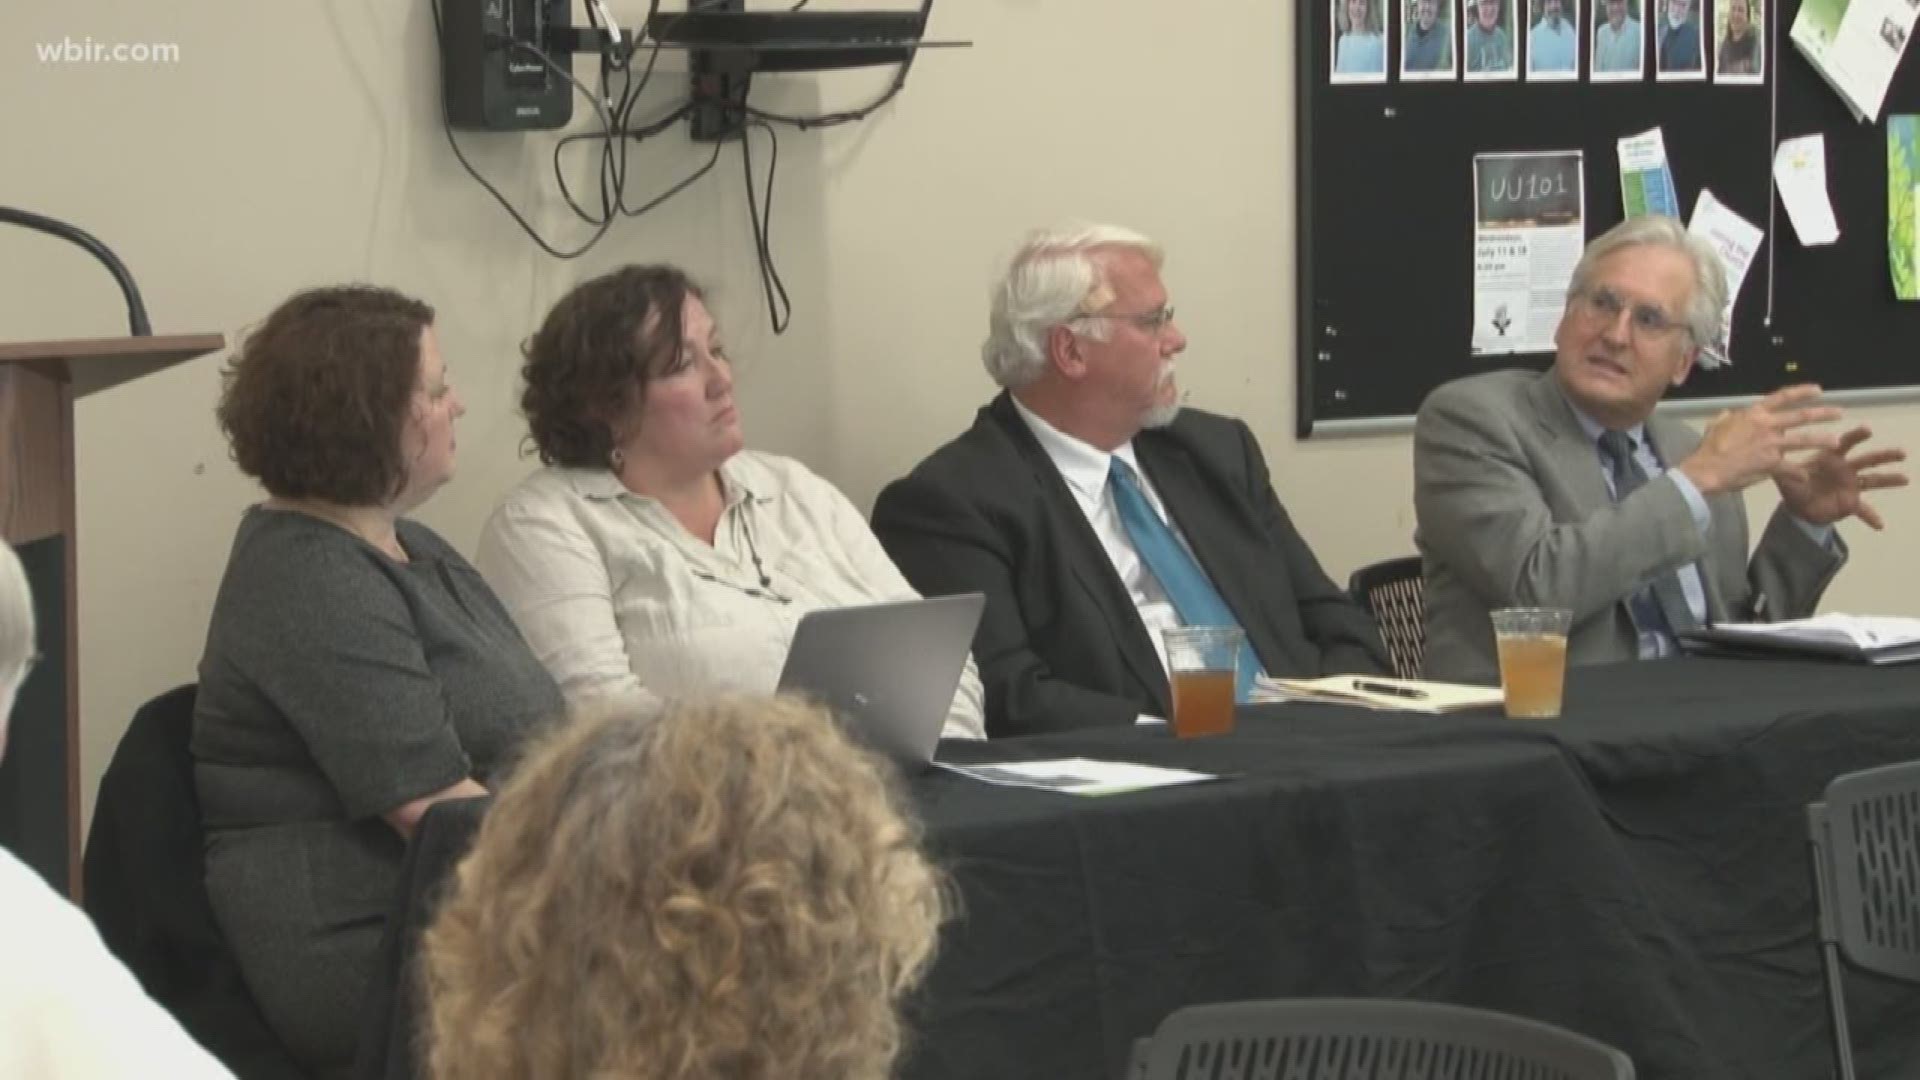 The Tennessee Alliance of Severe Mental Illness Exclusion hosted a panel to discuss whether or not people with mental illnesses should be sentenced to death.